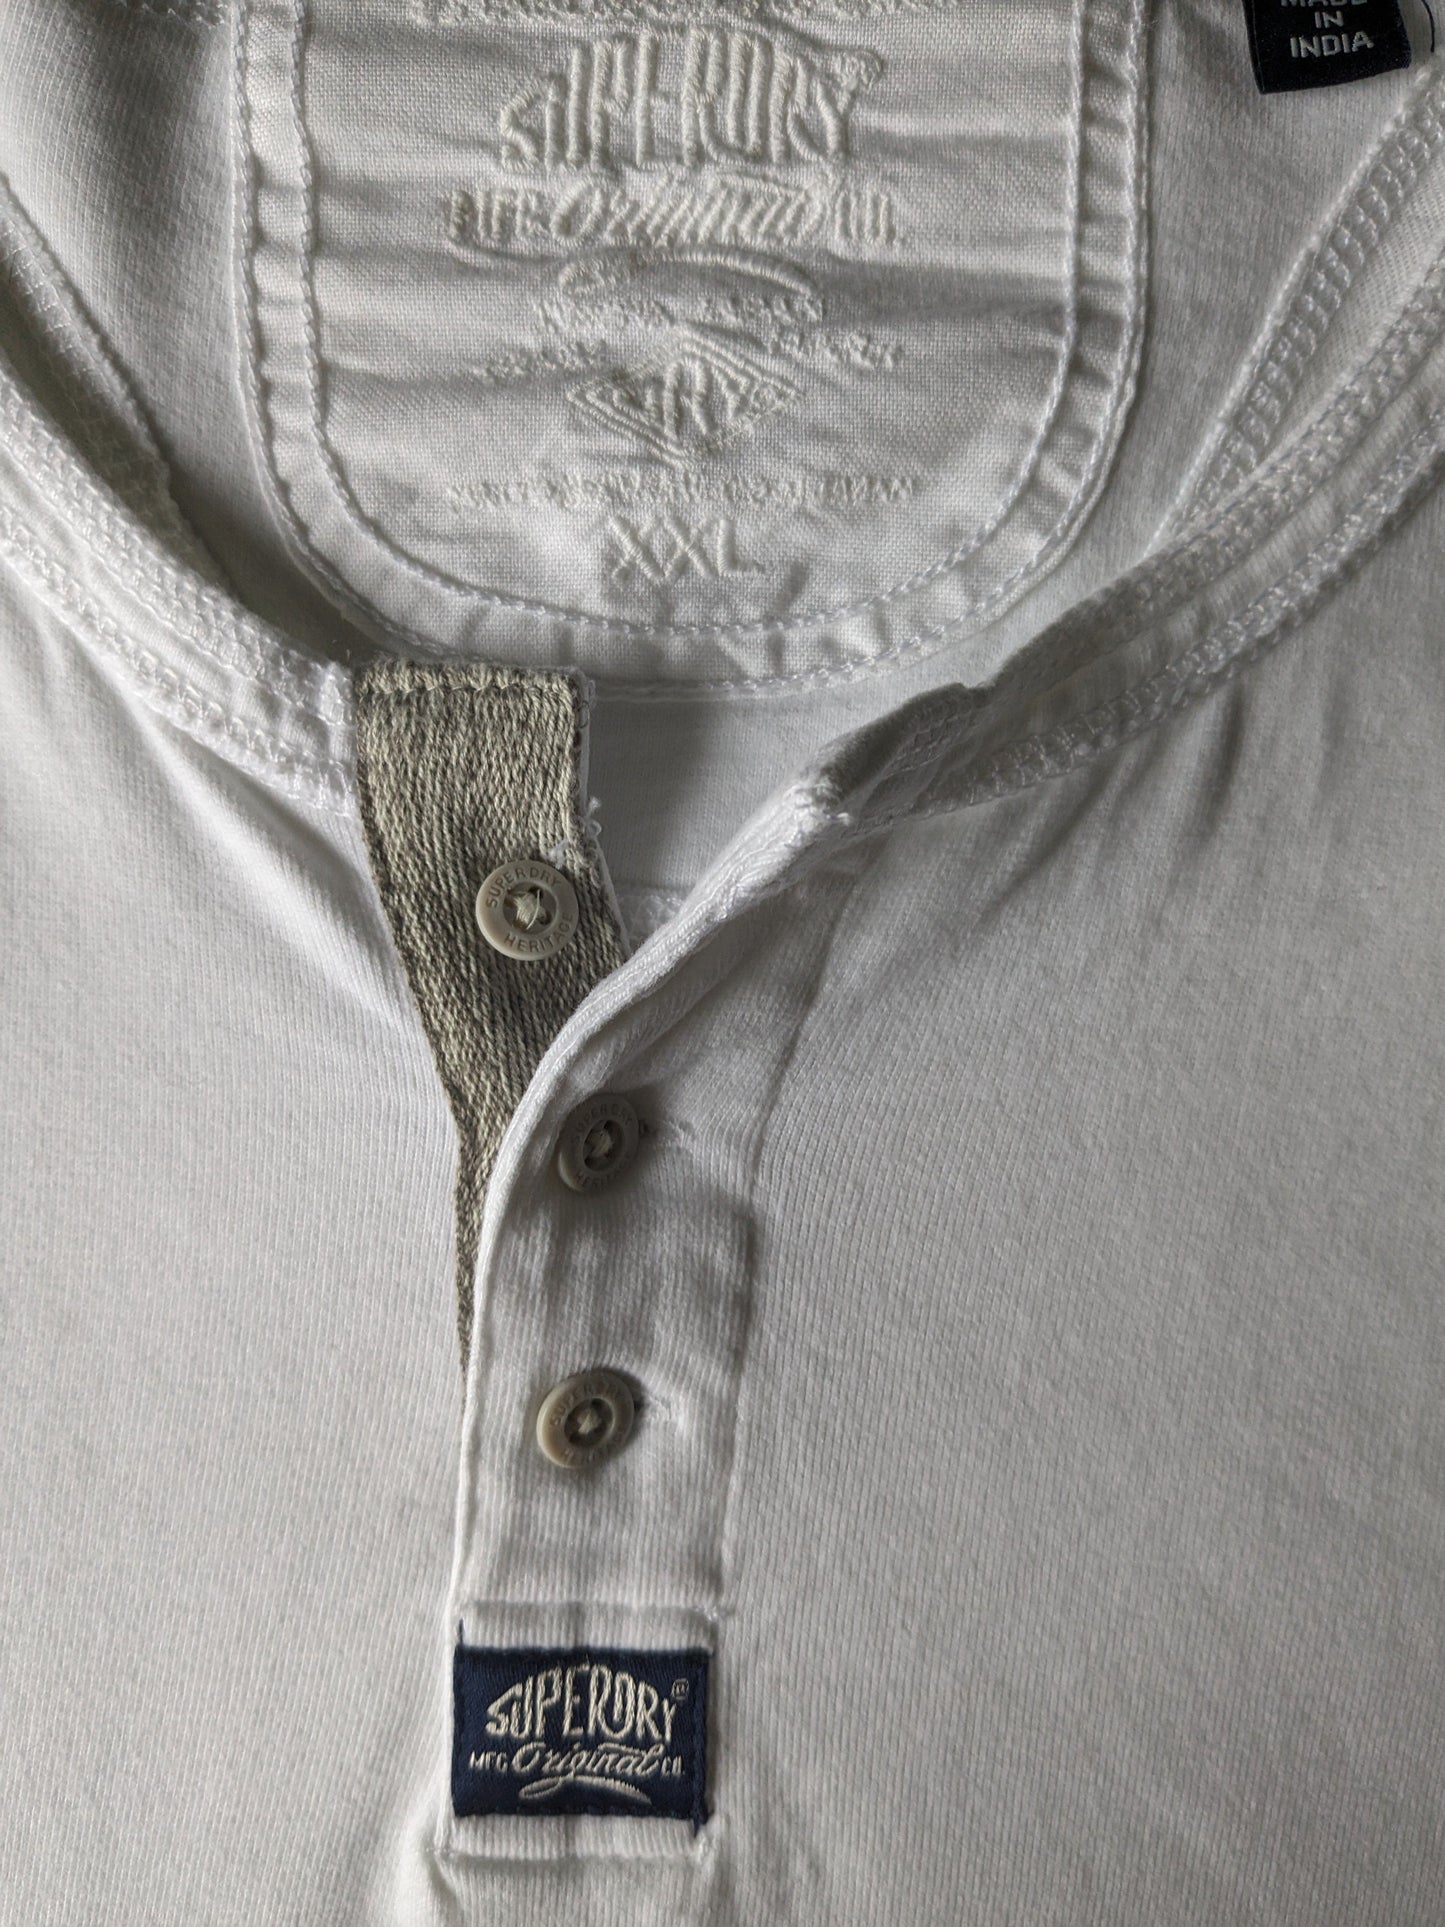 Superdry Longsleeve with buttons. White. Size L / XL.